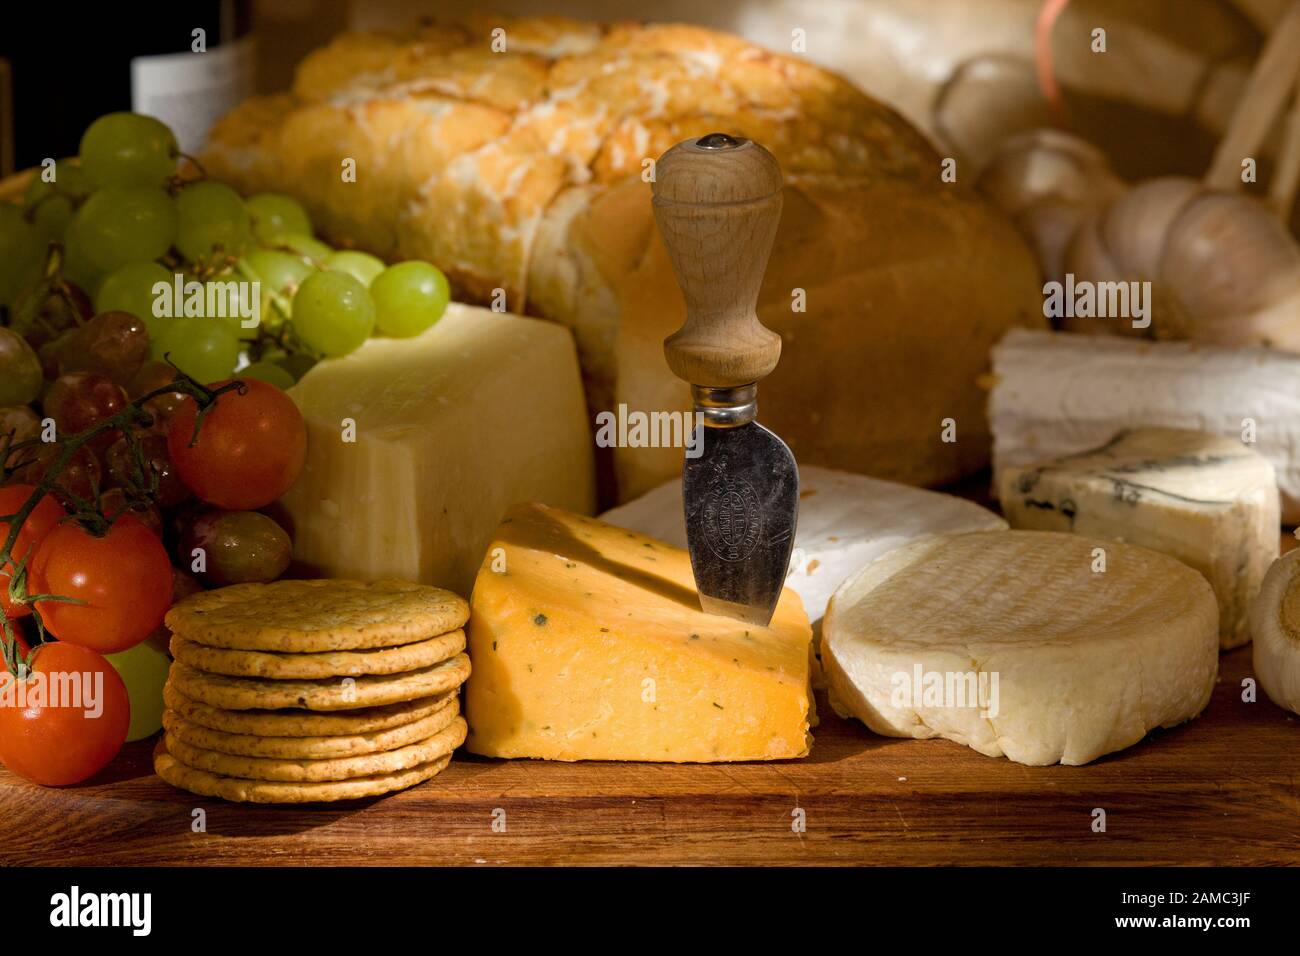 Cheese board with a selection of cheeses and fruits Stock Photo